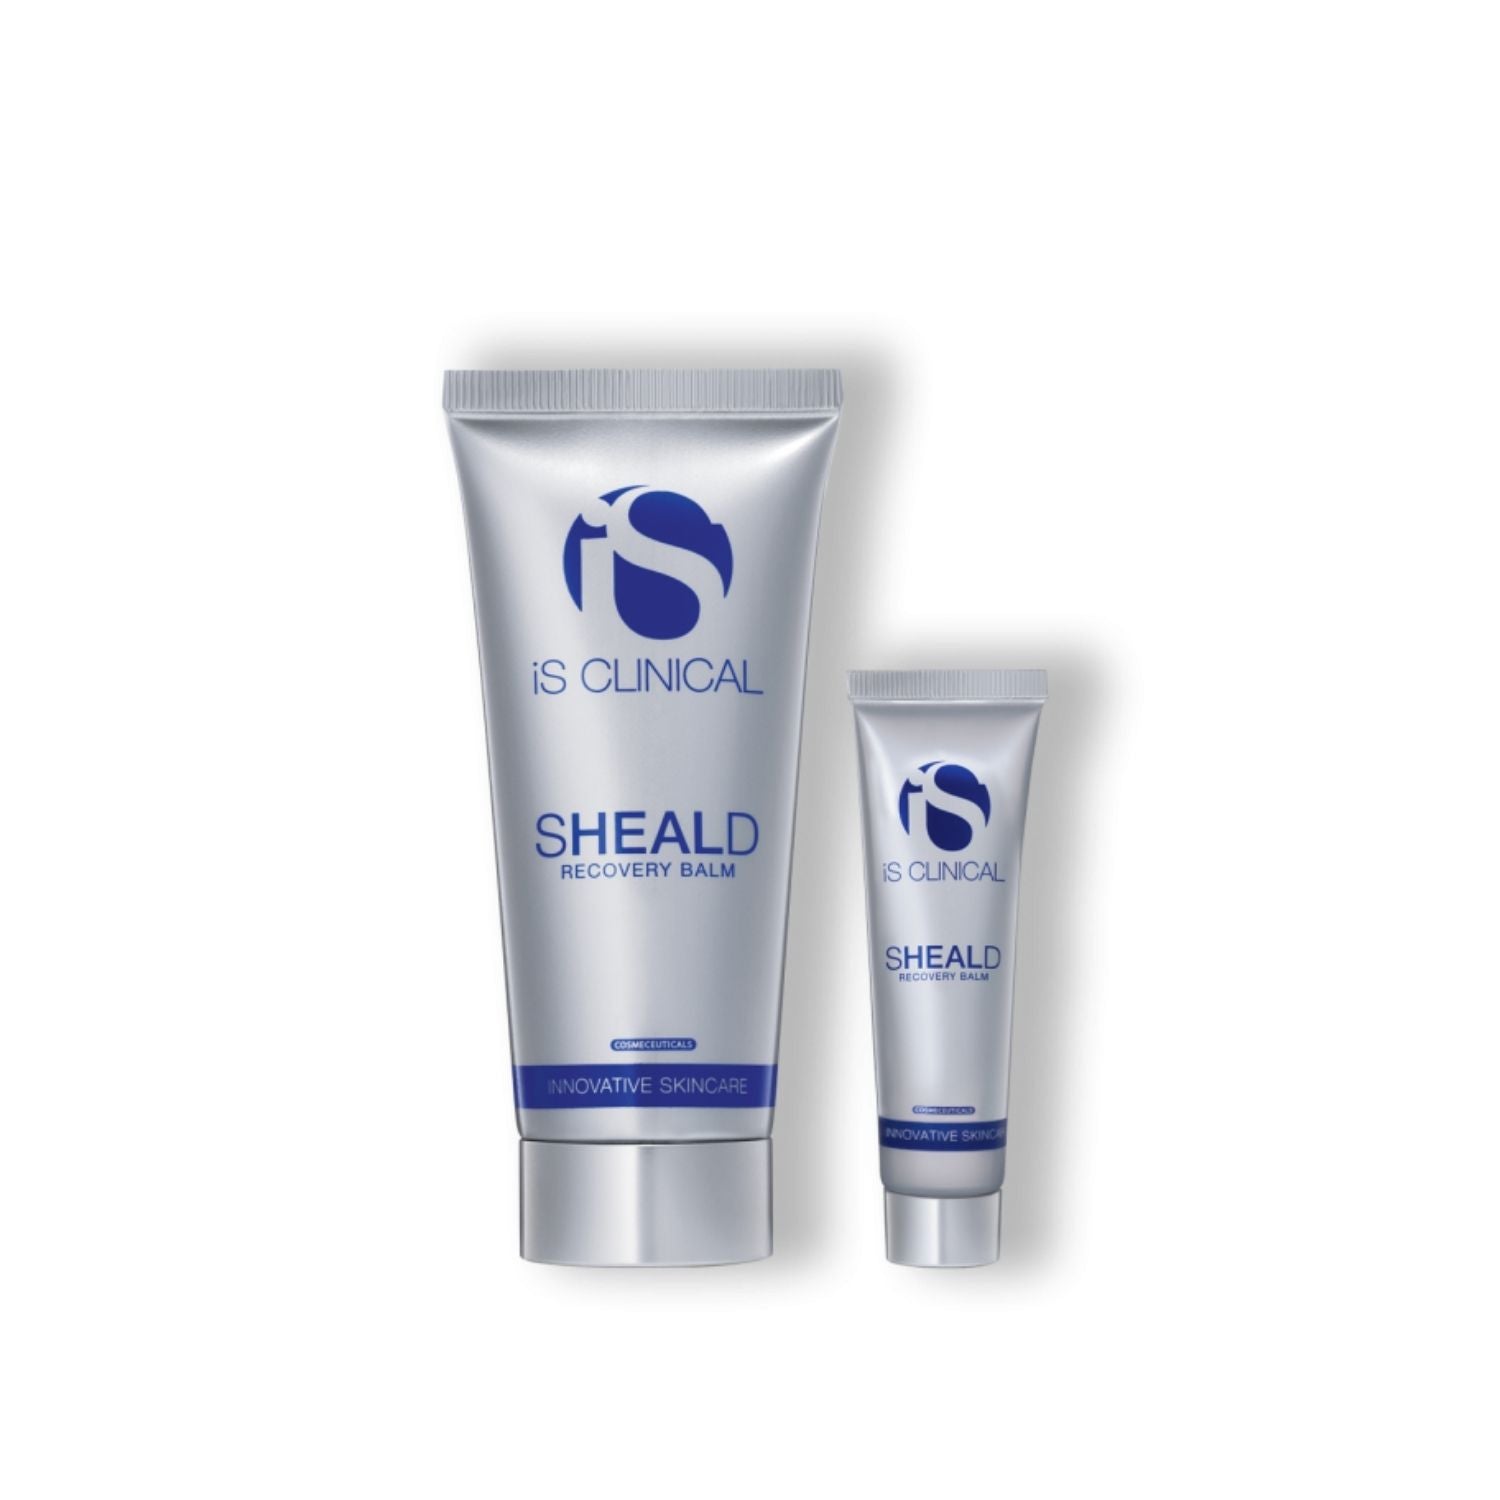 iS Clinical Sheald Recovery Balm 60g - Dr. Pen Store - iS Clinical Buy Genuine Dr Pen Products with Trust